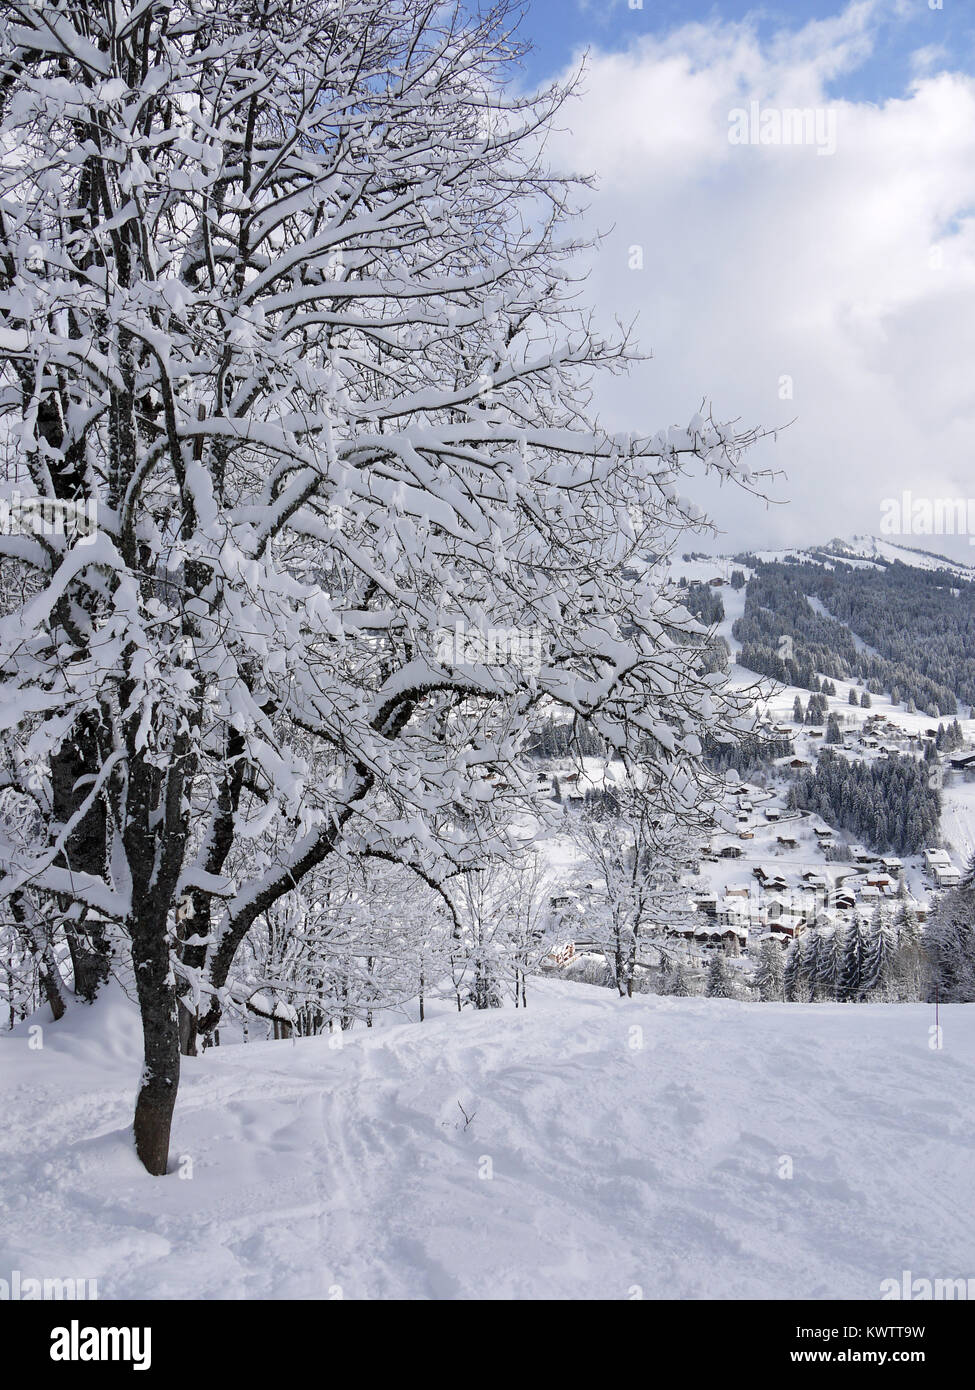 Winter trees covered in new snow in the ski and snowboarding resort of Les Gets, France Stock Photo